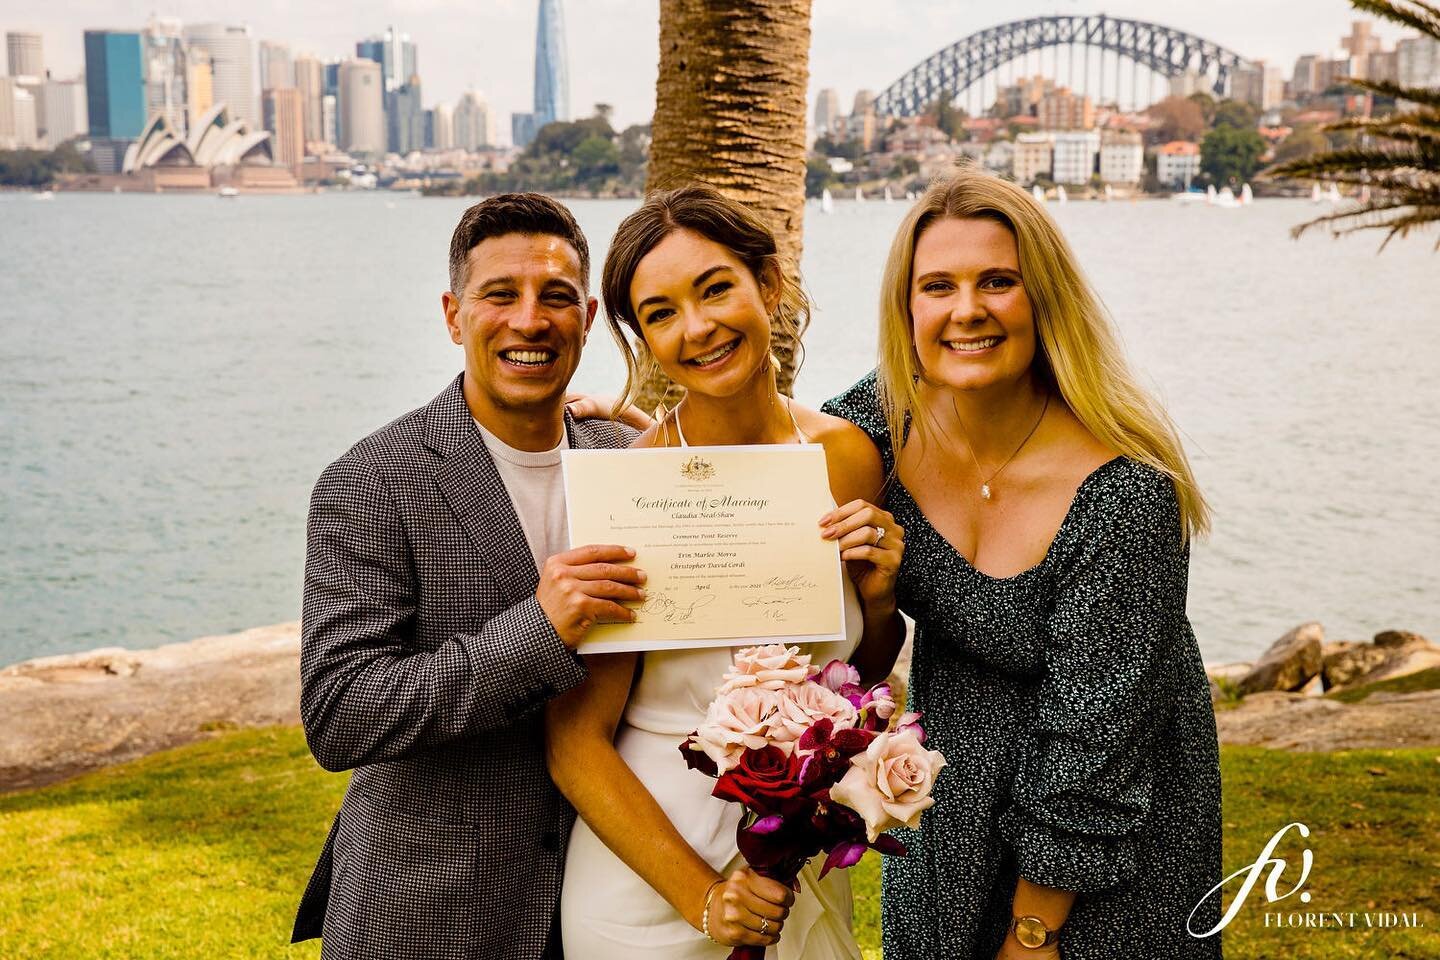 ❤️ LEGALLY LOVED UP ❤️

Sometimes the big hurrah of a grand scale wedding day just isn&rsquo;t your thing&hellip; 

OR, you&rsquo;re like Erin and Chris who were waiting for their destination wedding in Hawaii. 

BOOM - COVID. 

No probs, babes. 

We